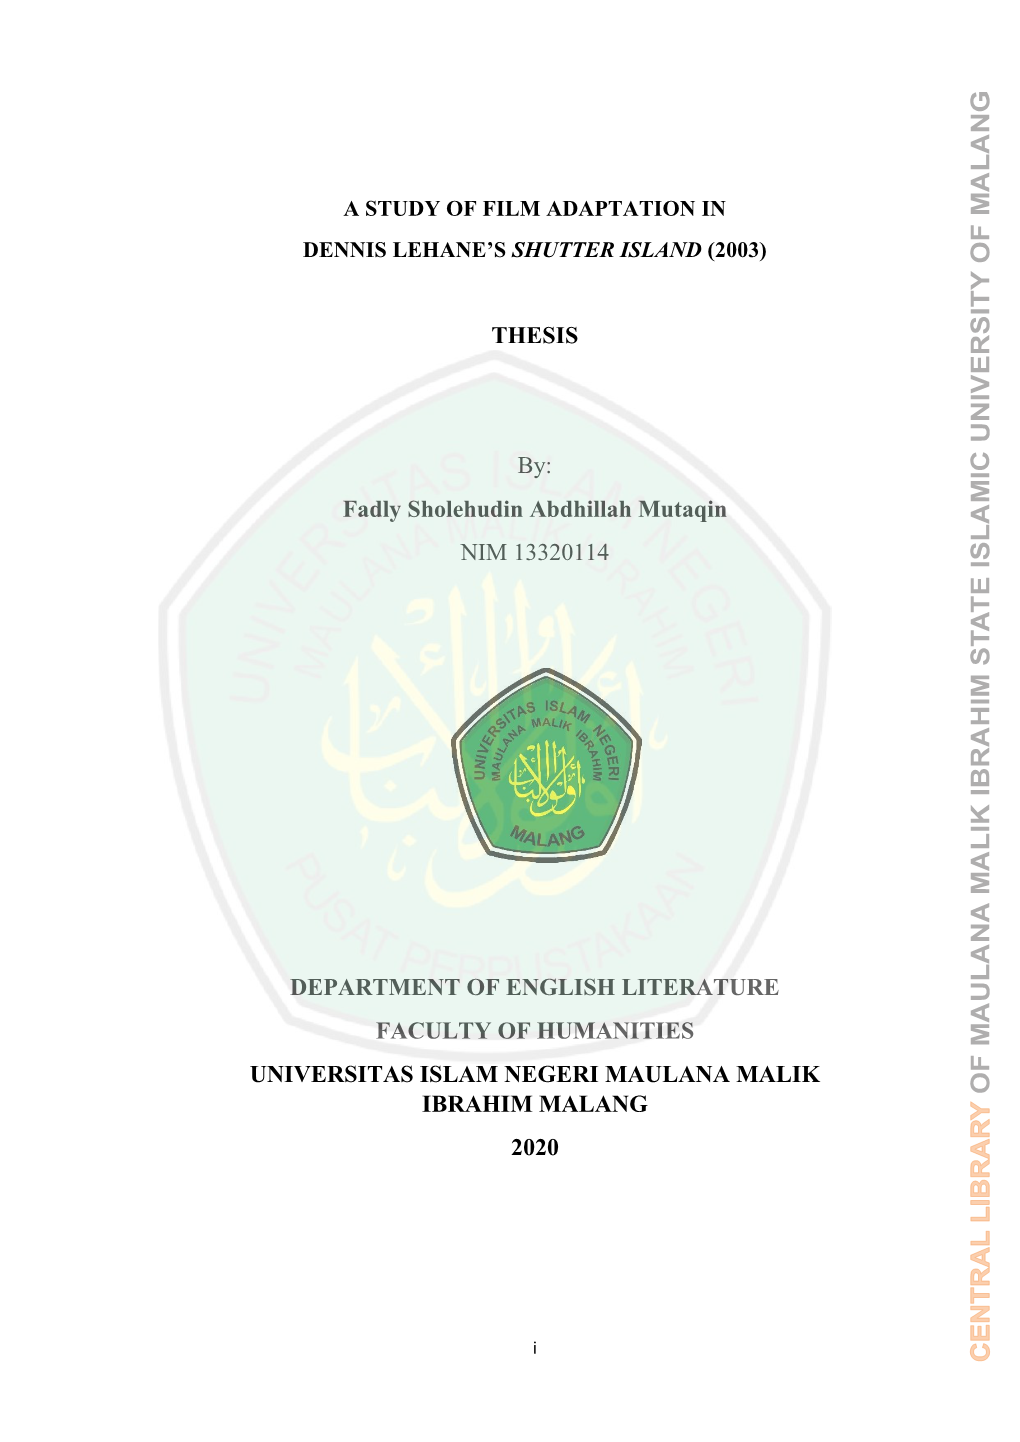 THESIS By: Fadly Sholehudin Abdhillah Mutaqin NIM 13320114 DEPARTMENT of ENGLISH LITERATURE FACULTY of HUMANITIES UNIVERSITAS IS